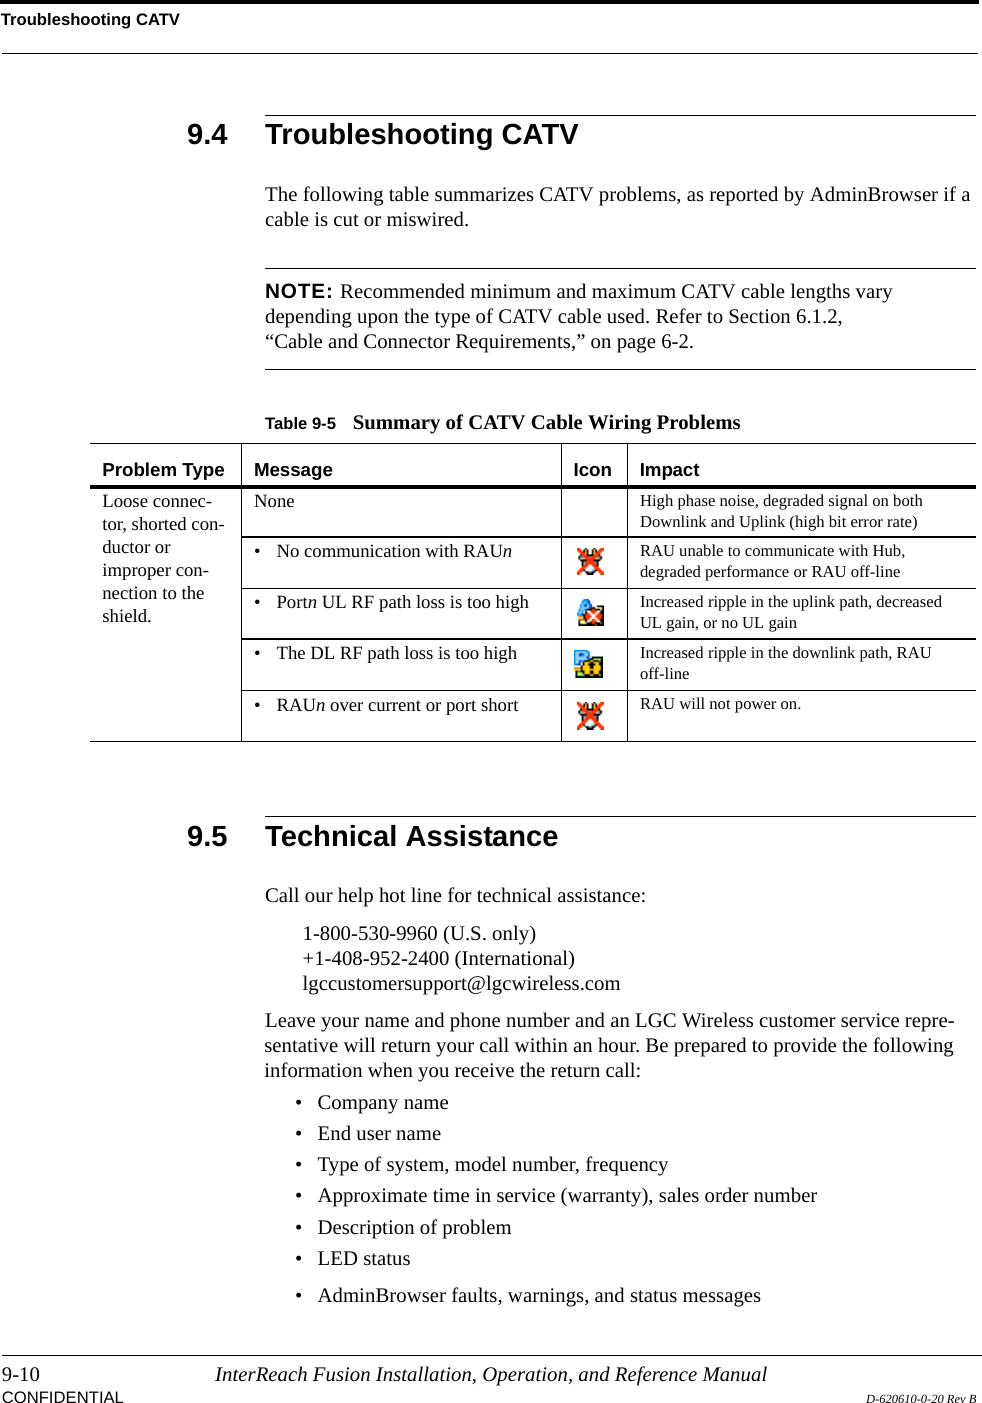 Troubleshooting CATV9-10 InterReach Fusion Installation, Operation, and Reference ManualCONFIDENTIAL D-620610-0-20 Rev B9.4 Troubleshooting CATVThe following table summarizes CATV problems, as reported by AdminBrowser if a cable is cut or miswired.NOTE: Recommended minimum and maximum CATV cable lengths vary depending upon the type of CATV cable used. Refer to Section 6.1.2, “Cable and Connector Requirements,” on page 6-2.9.5 Technical AssistanceCall our help hot line for technical assistance:1-800-530-9960 (U.S. only)+1-408-952-2400 (International)lgccustomersupport@lgcwireless.comLeave your name and phone number and an LGC Wireless customer service repre-sentative will return your call within an hour. Be prepared to provide the following information when you receive the return call:• Company name• End user name• Type of system, model number, frequency• Approximate time in service (warranty), sales order number• Description of problem• LED status• AdminBrowser faults, warnings, and status messagesTable 9-5 Summary of CATV Cable Wiring ProblemsProblem Type Message Icon ImpactLoose connec-tor, shorted con-ductor or improper con-nection to the shield.None High phase noise, degraded signal on both Downlink and Uplink (high bit error rate)• No communication with RAUn  RAU unable to communicate with Hub, degraded performance or RAU off-line• Portn UL RF path loss is too high Increased ripple in the uplink path, decreased UL gain, or no UL gain• The DL RF path loss is too high Increased ripple in the downlink path, RAU off-line•RAUn over current or port short RAU will not power on.